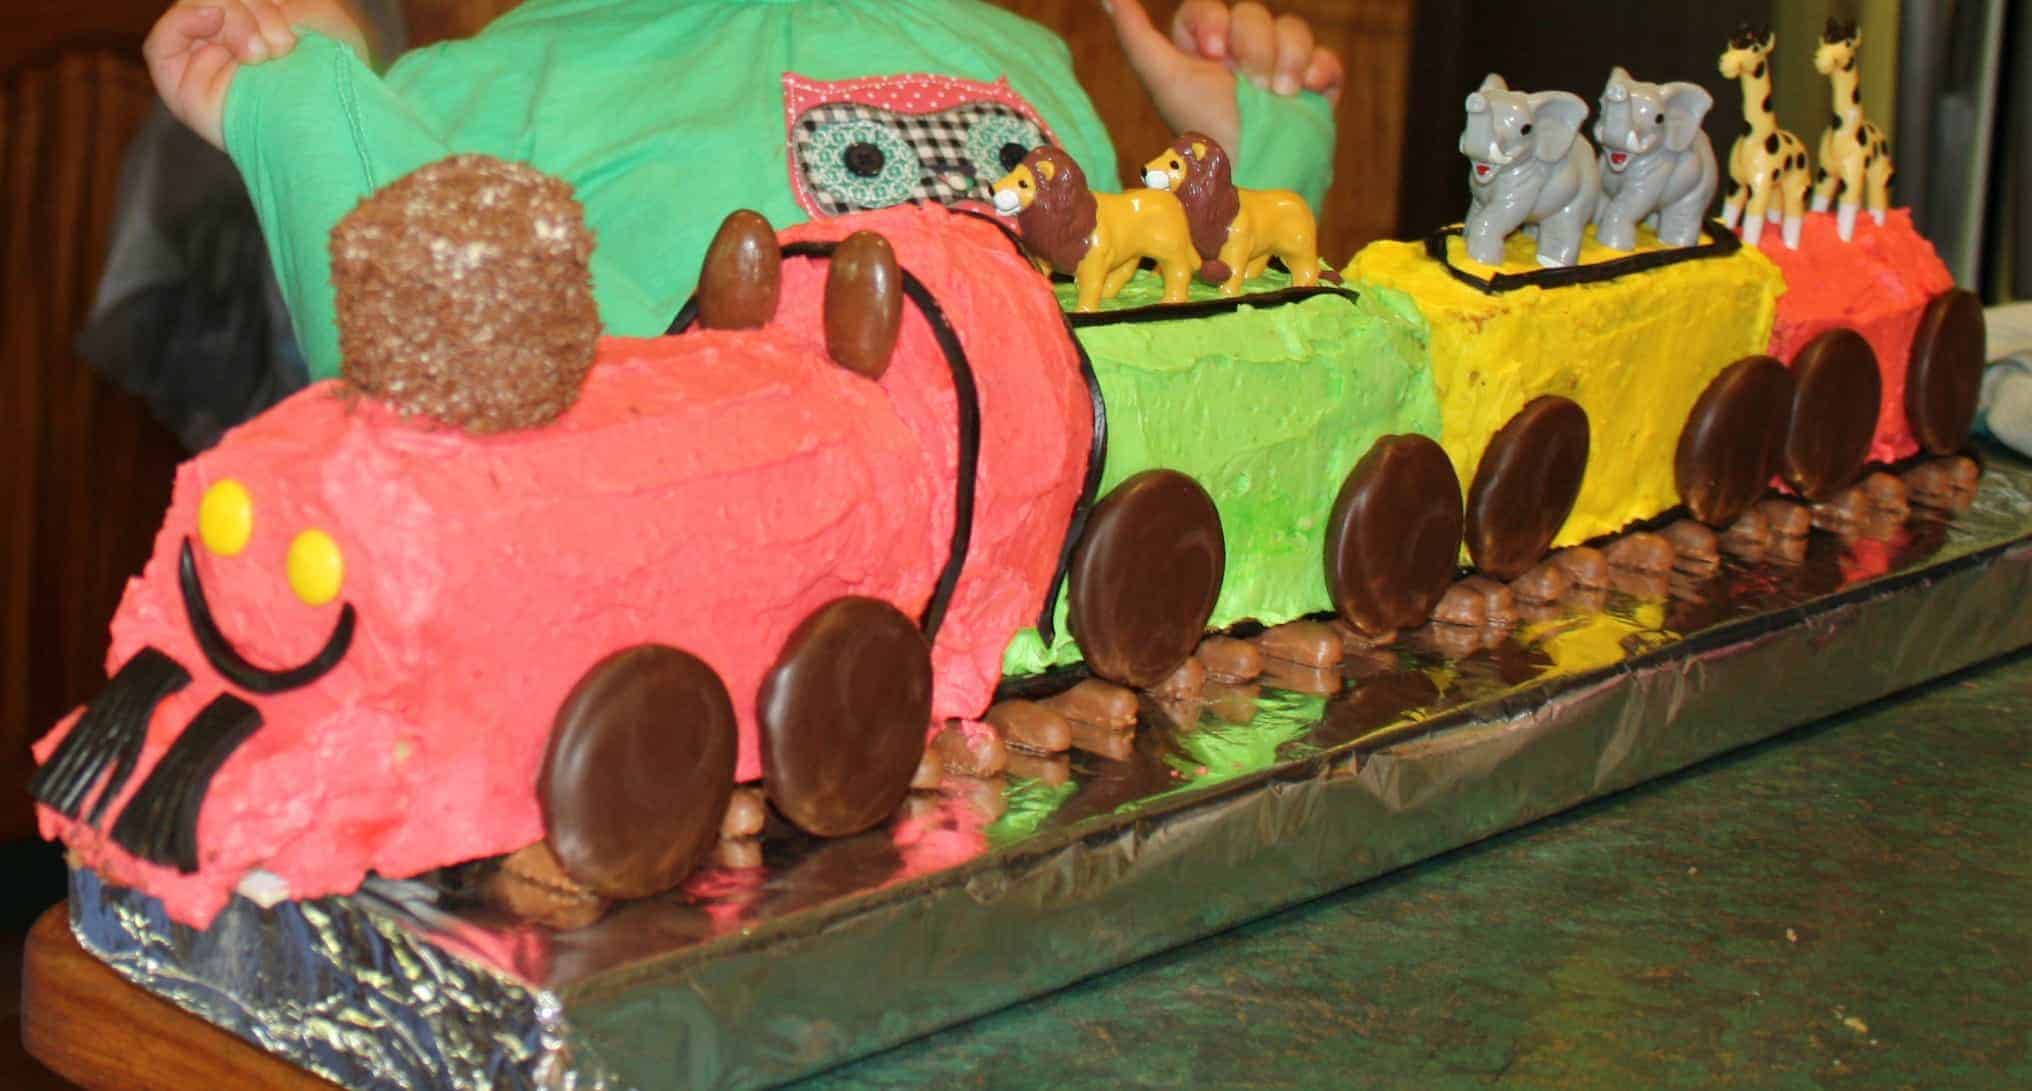 Cooker and a Looker Train Cake